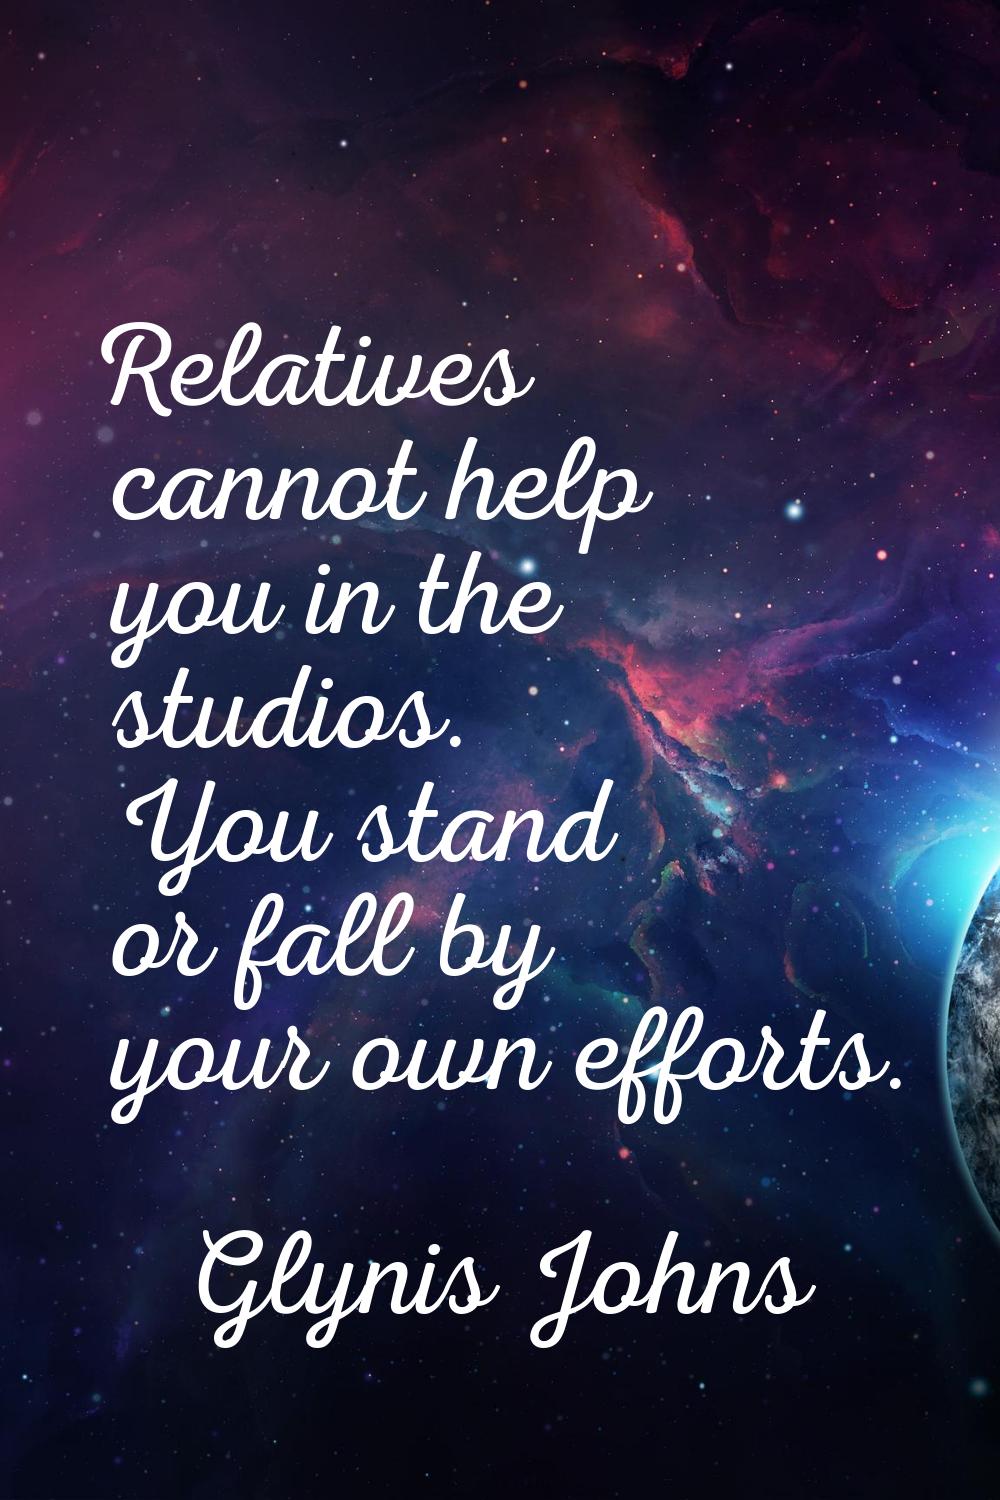 Relatives cannot help you in the studios. You stand or fall by your own efforts.